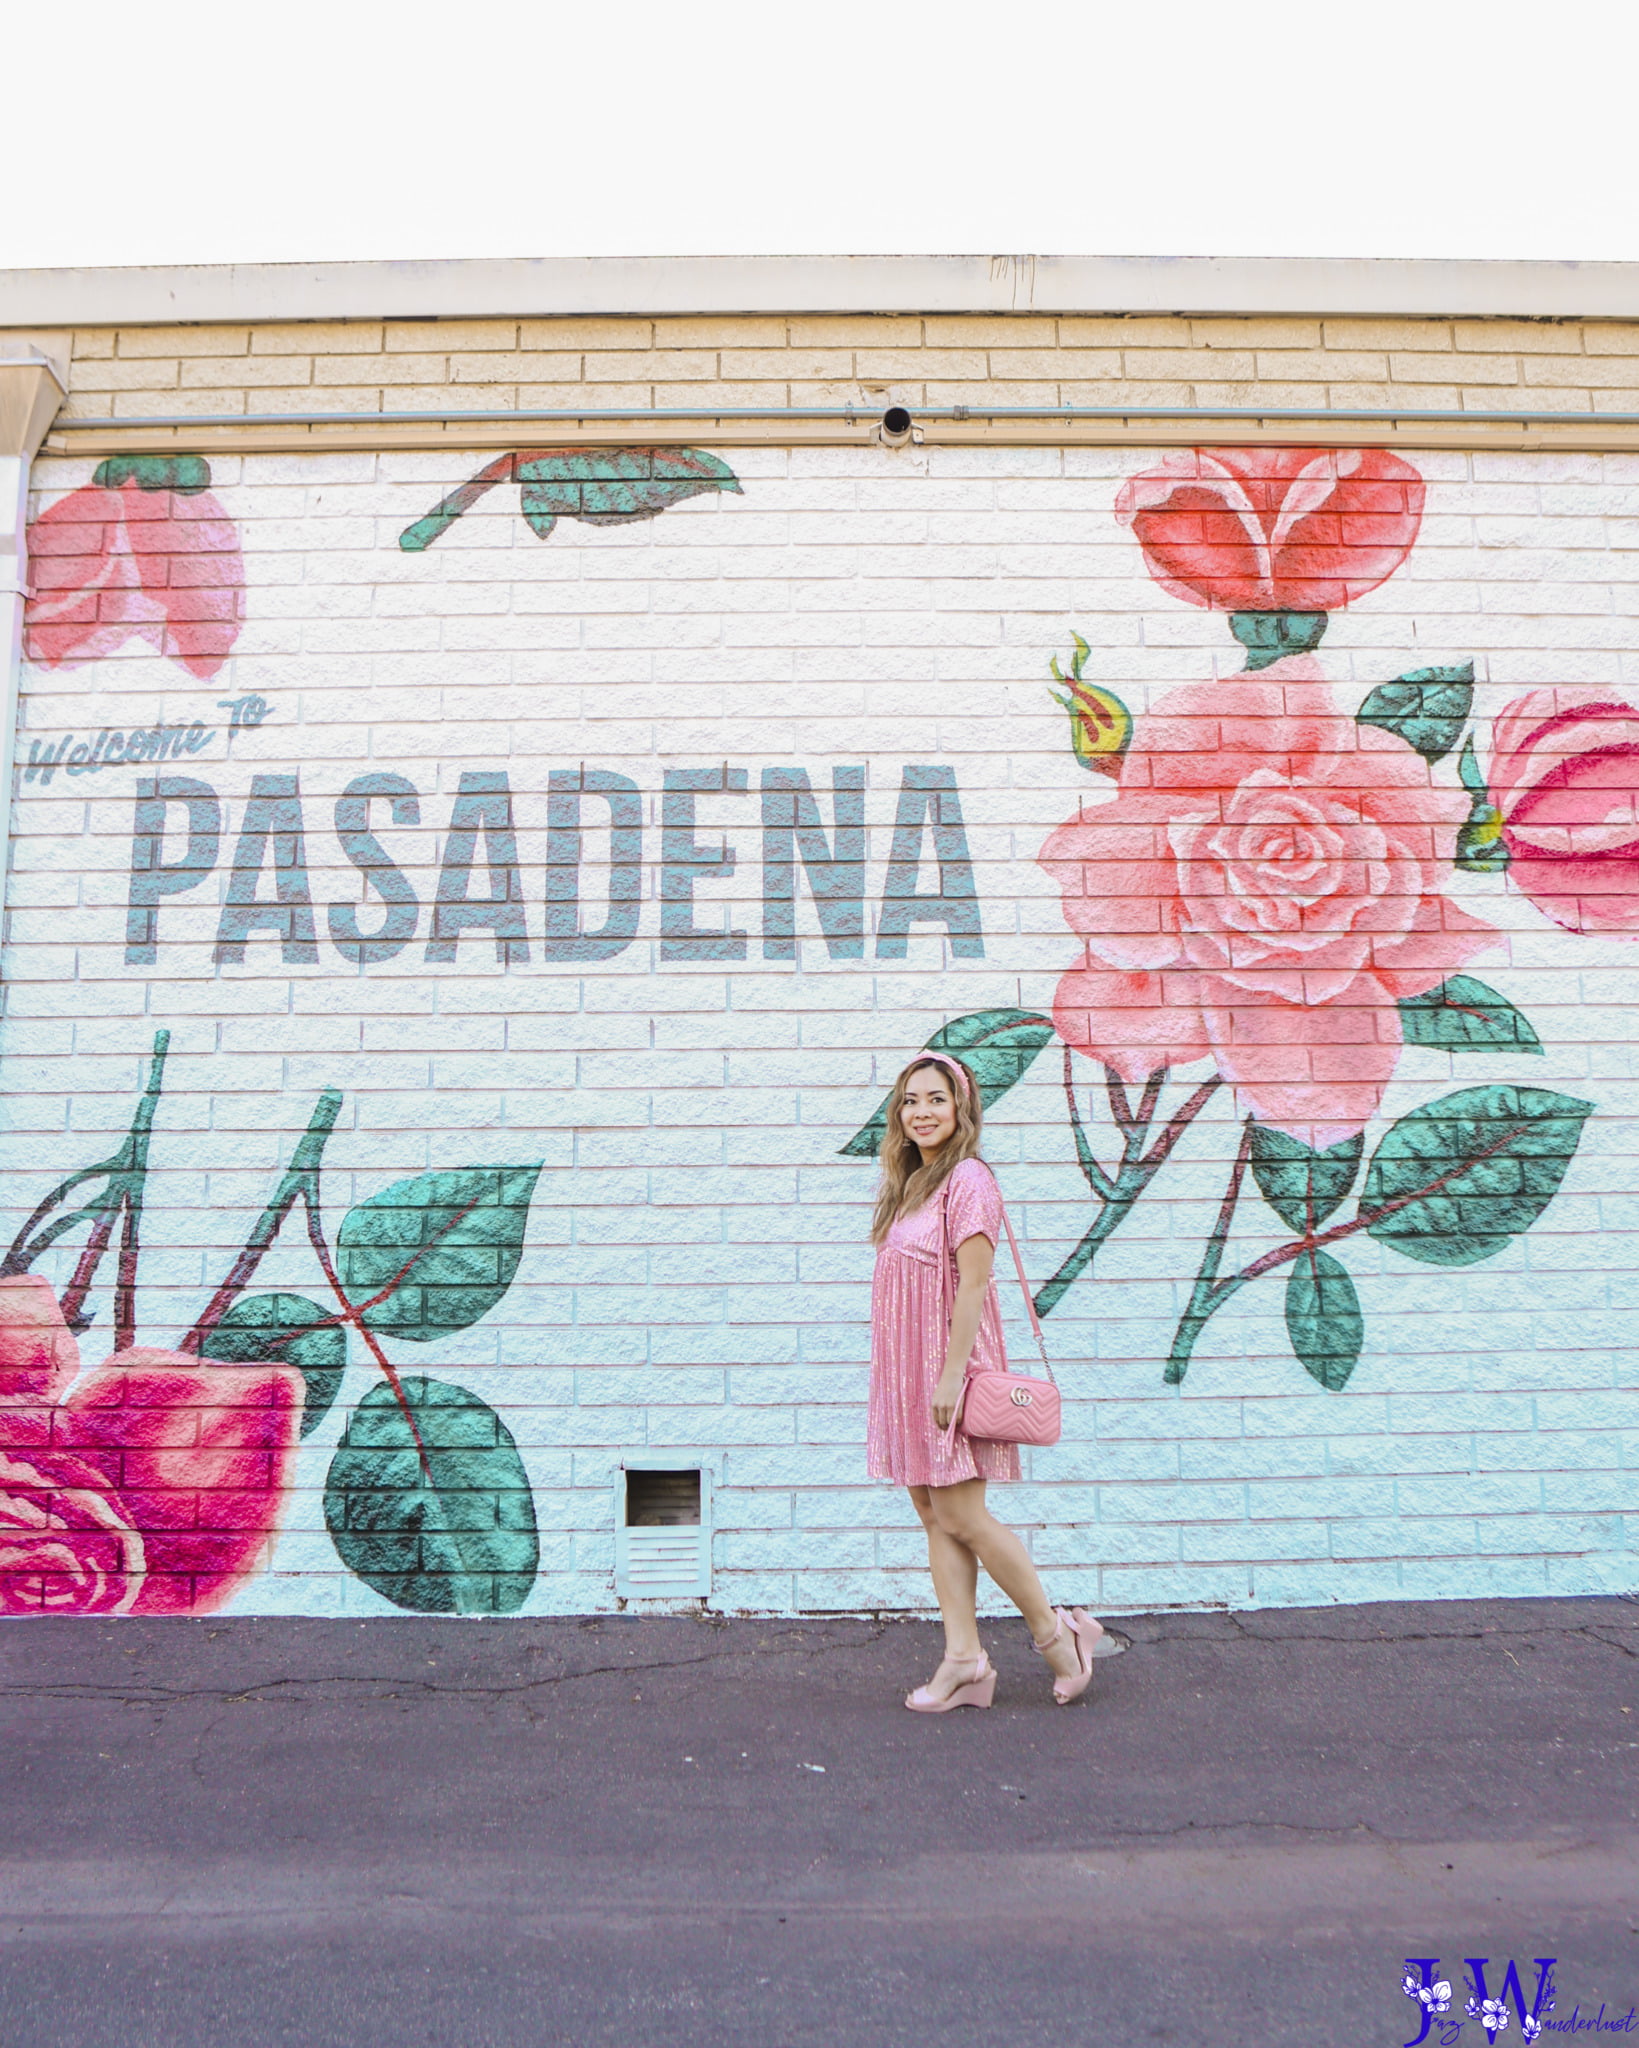 Welcome to Pasadena mural at Dots Cafe in Pasadena. Photography by Jaz Wanderlust.